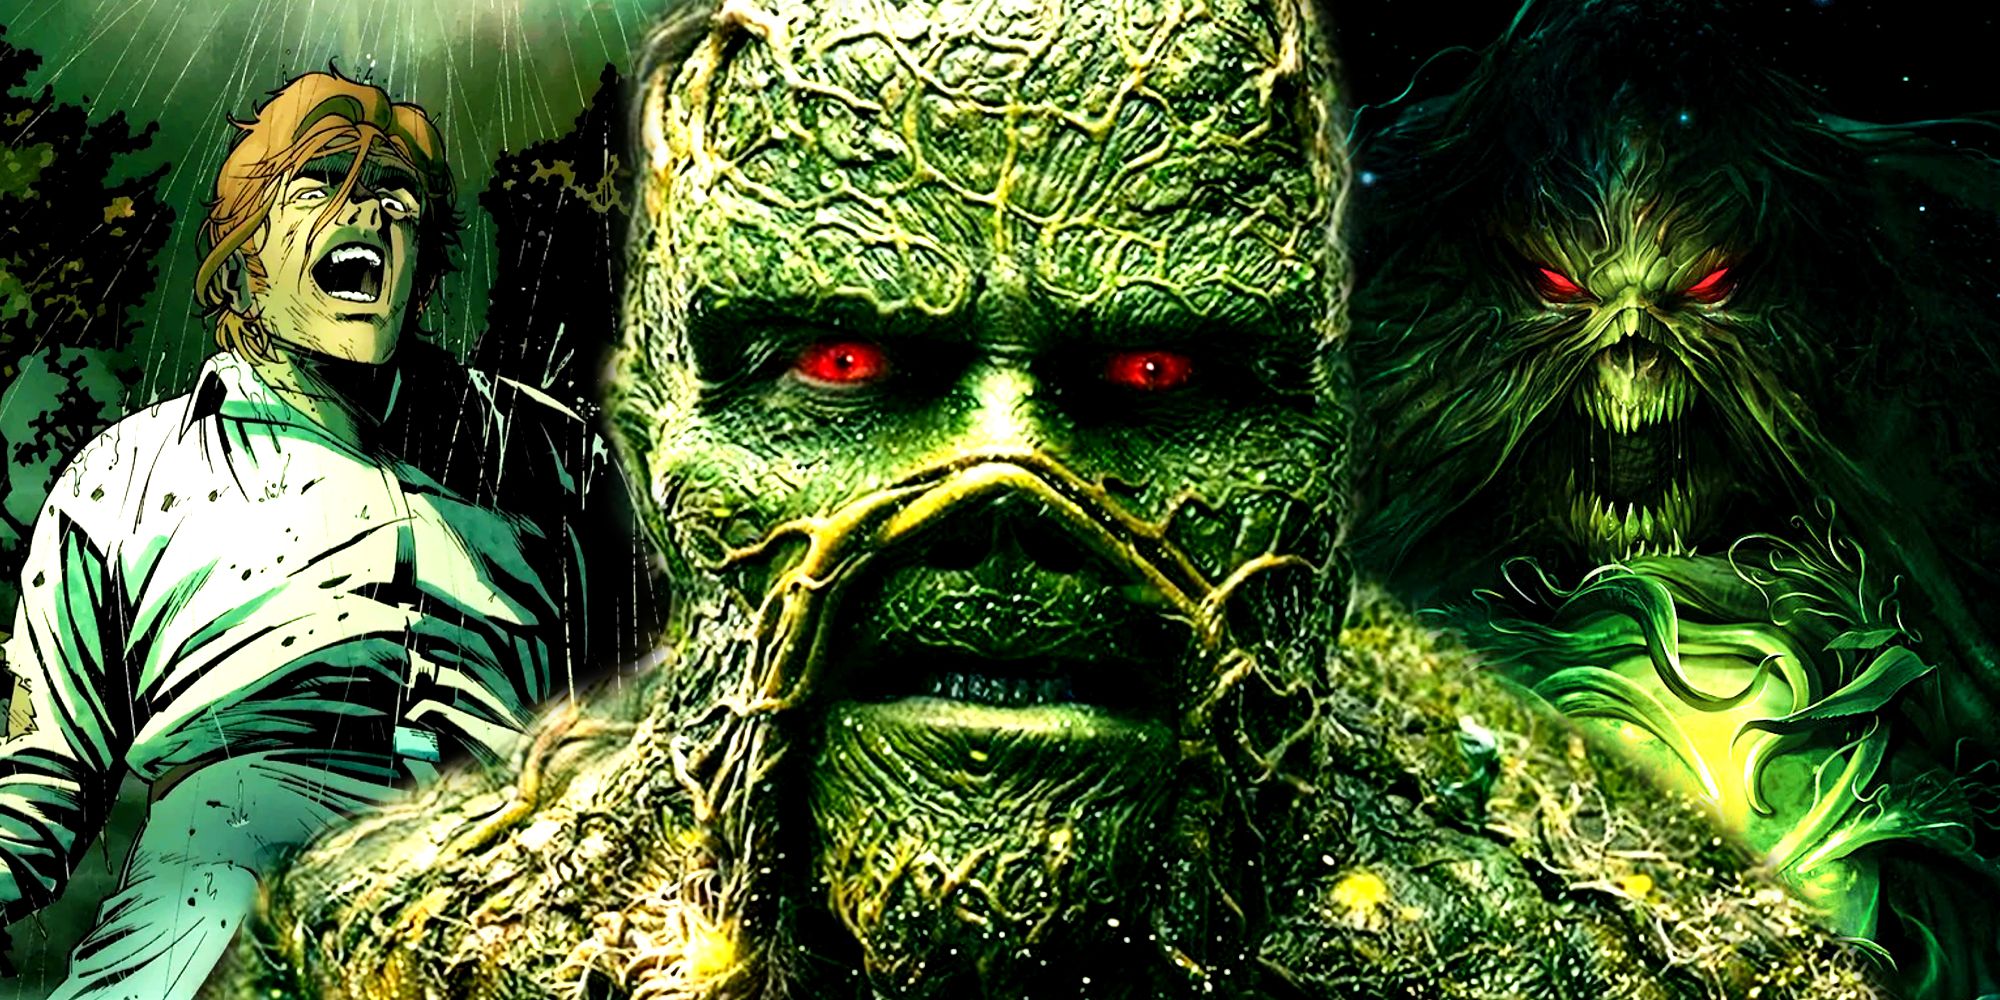 Blended image with Swamp Thing from the 2019 Series and in DC Comics